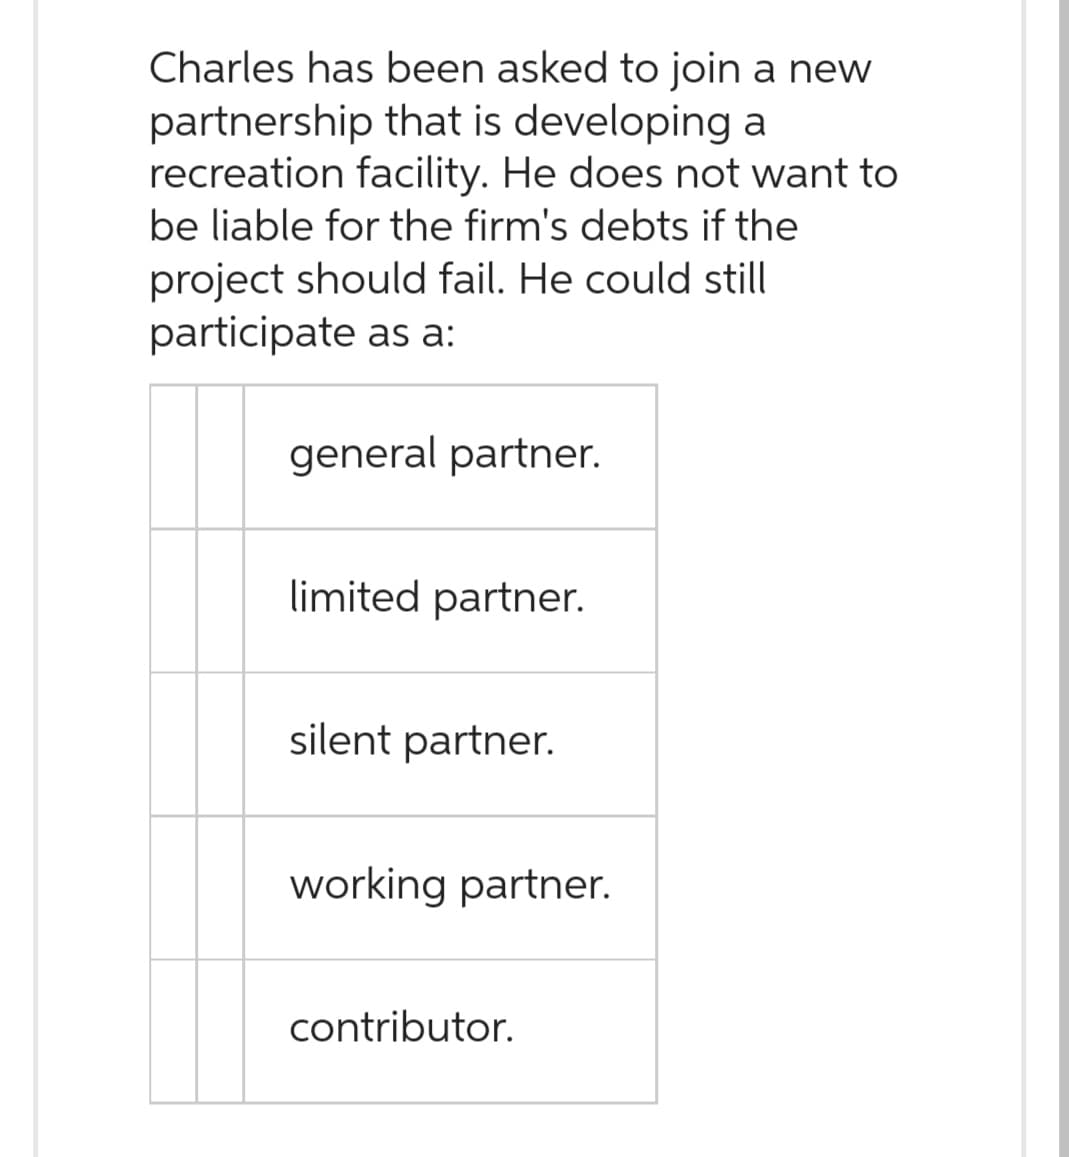 Charles has been asked to join a new
partnership that is developing a
recreation facility. He does not want to
be liable for the firm's debts if the
project should fail. He could still
participate as a:
general partner.
limited partner.
silent partner.
working partner.
contributor.